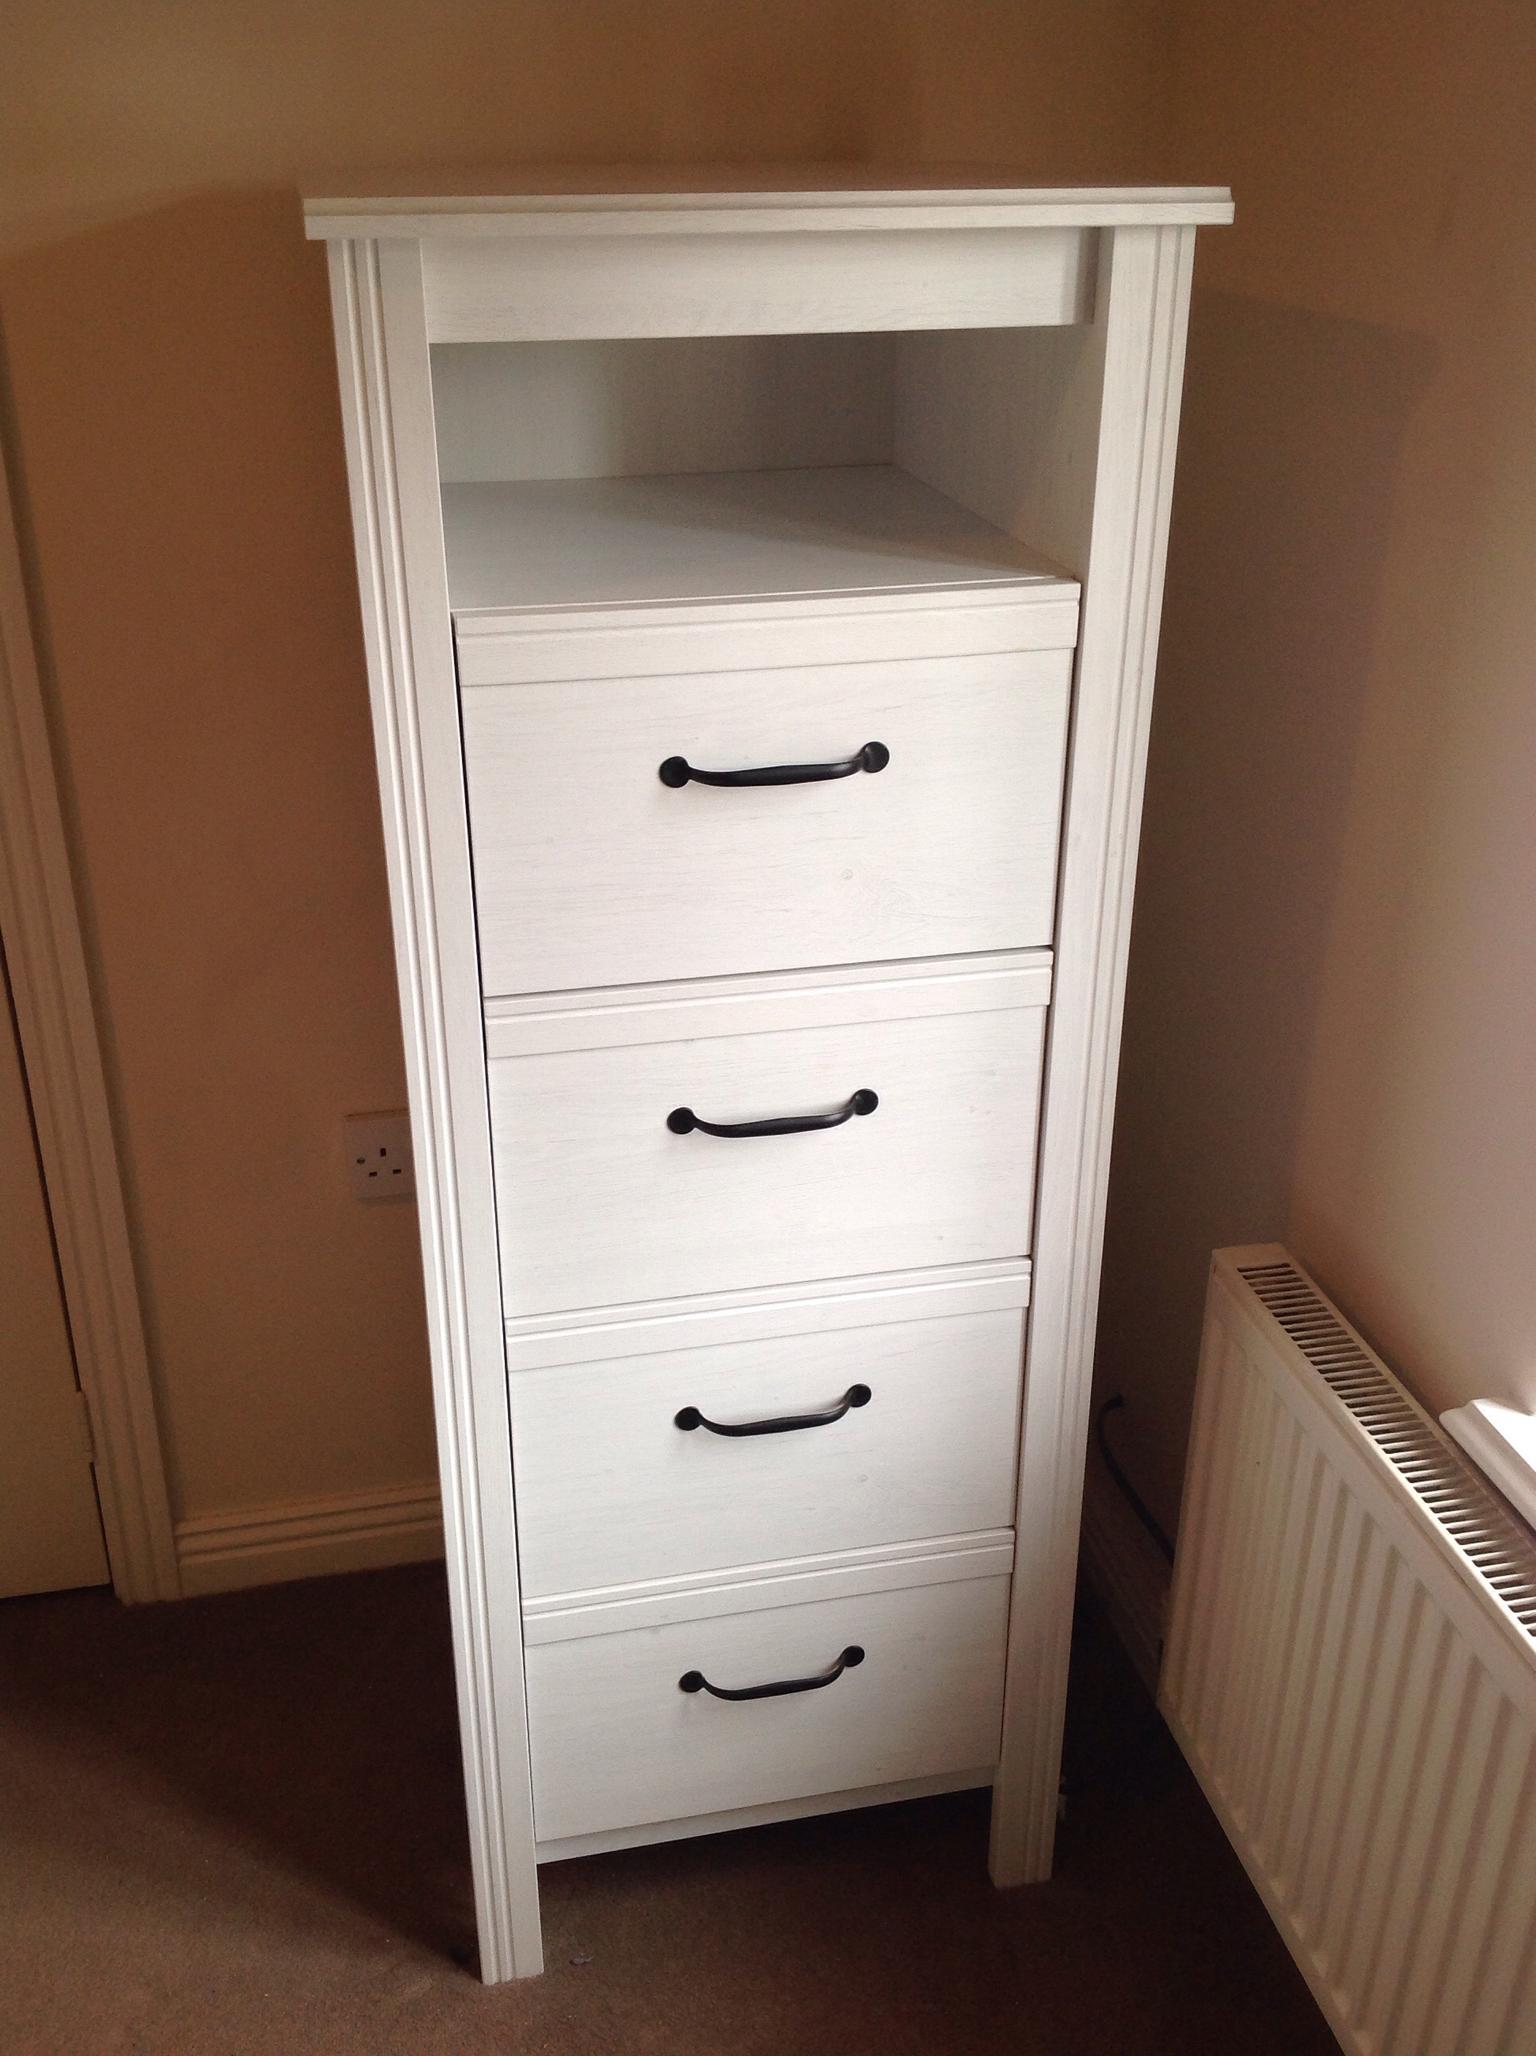 Ikea Brusali Tall Boy Chest Of Drawers In Sn12 Cleeve Fur 40 00